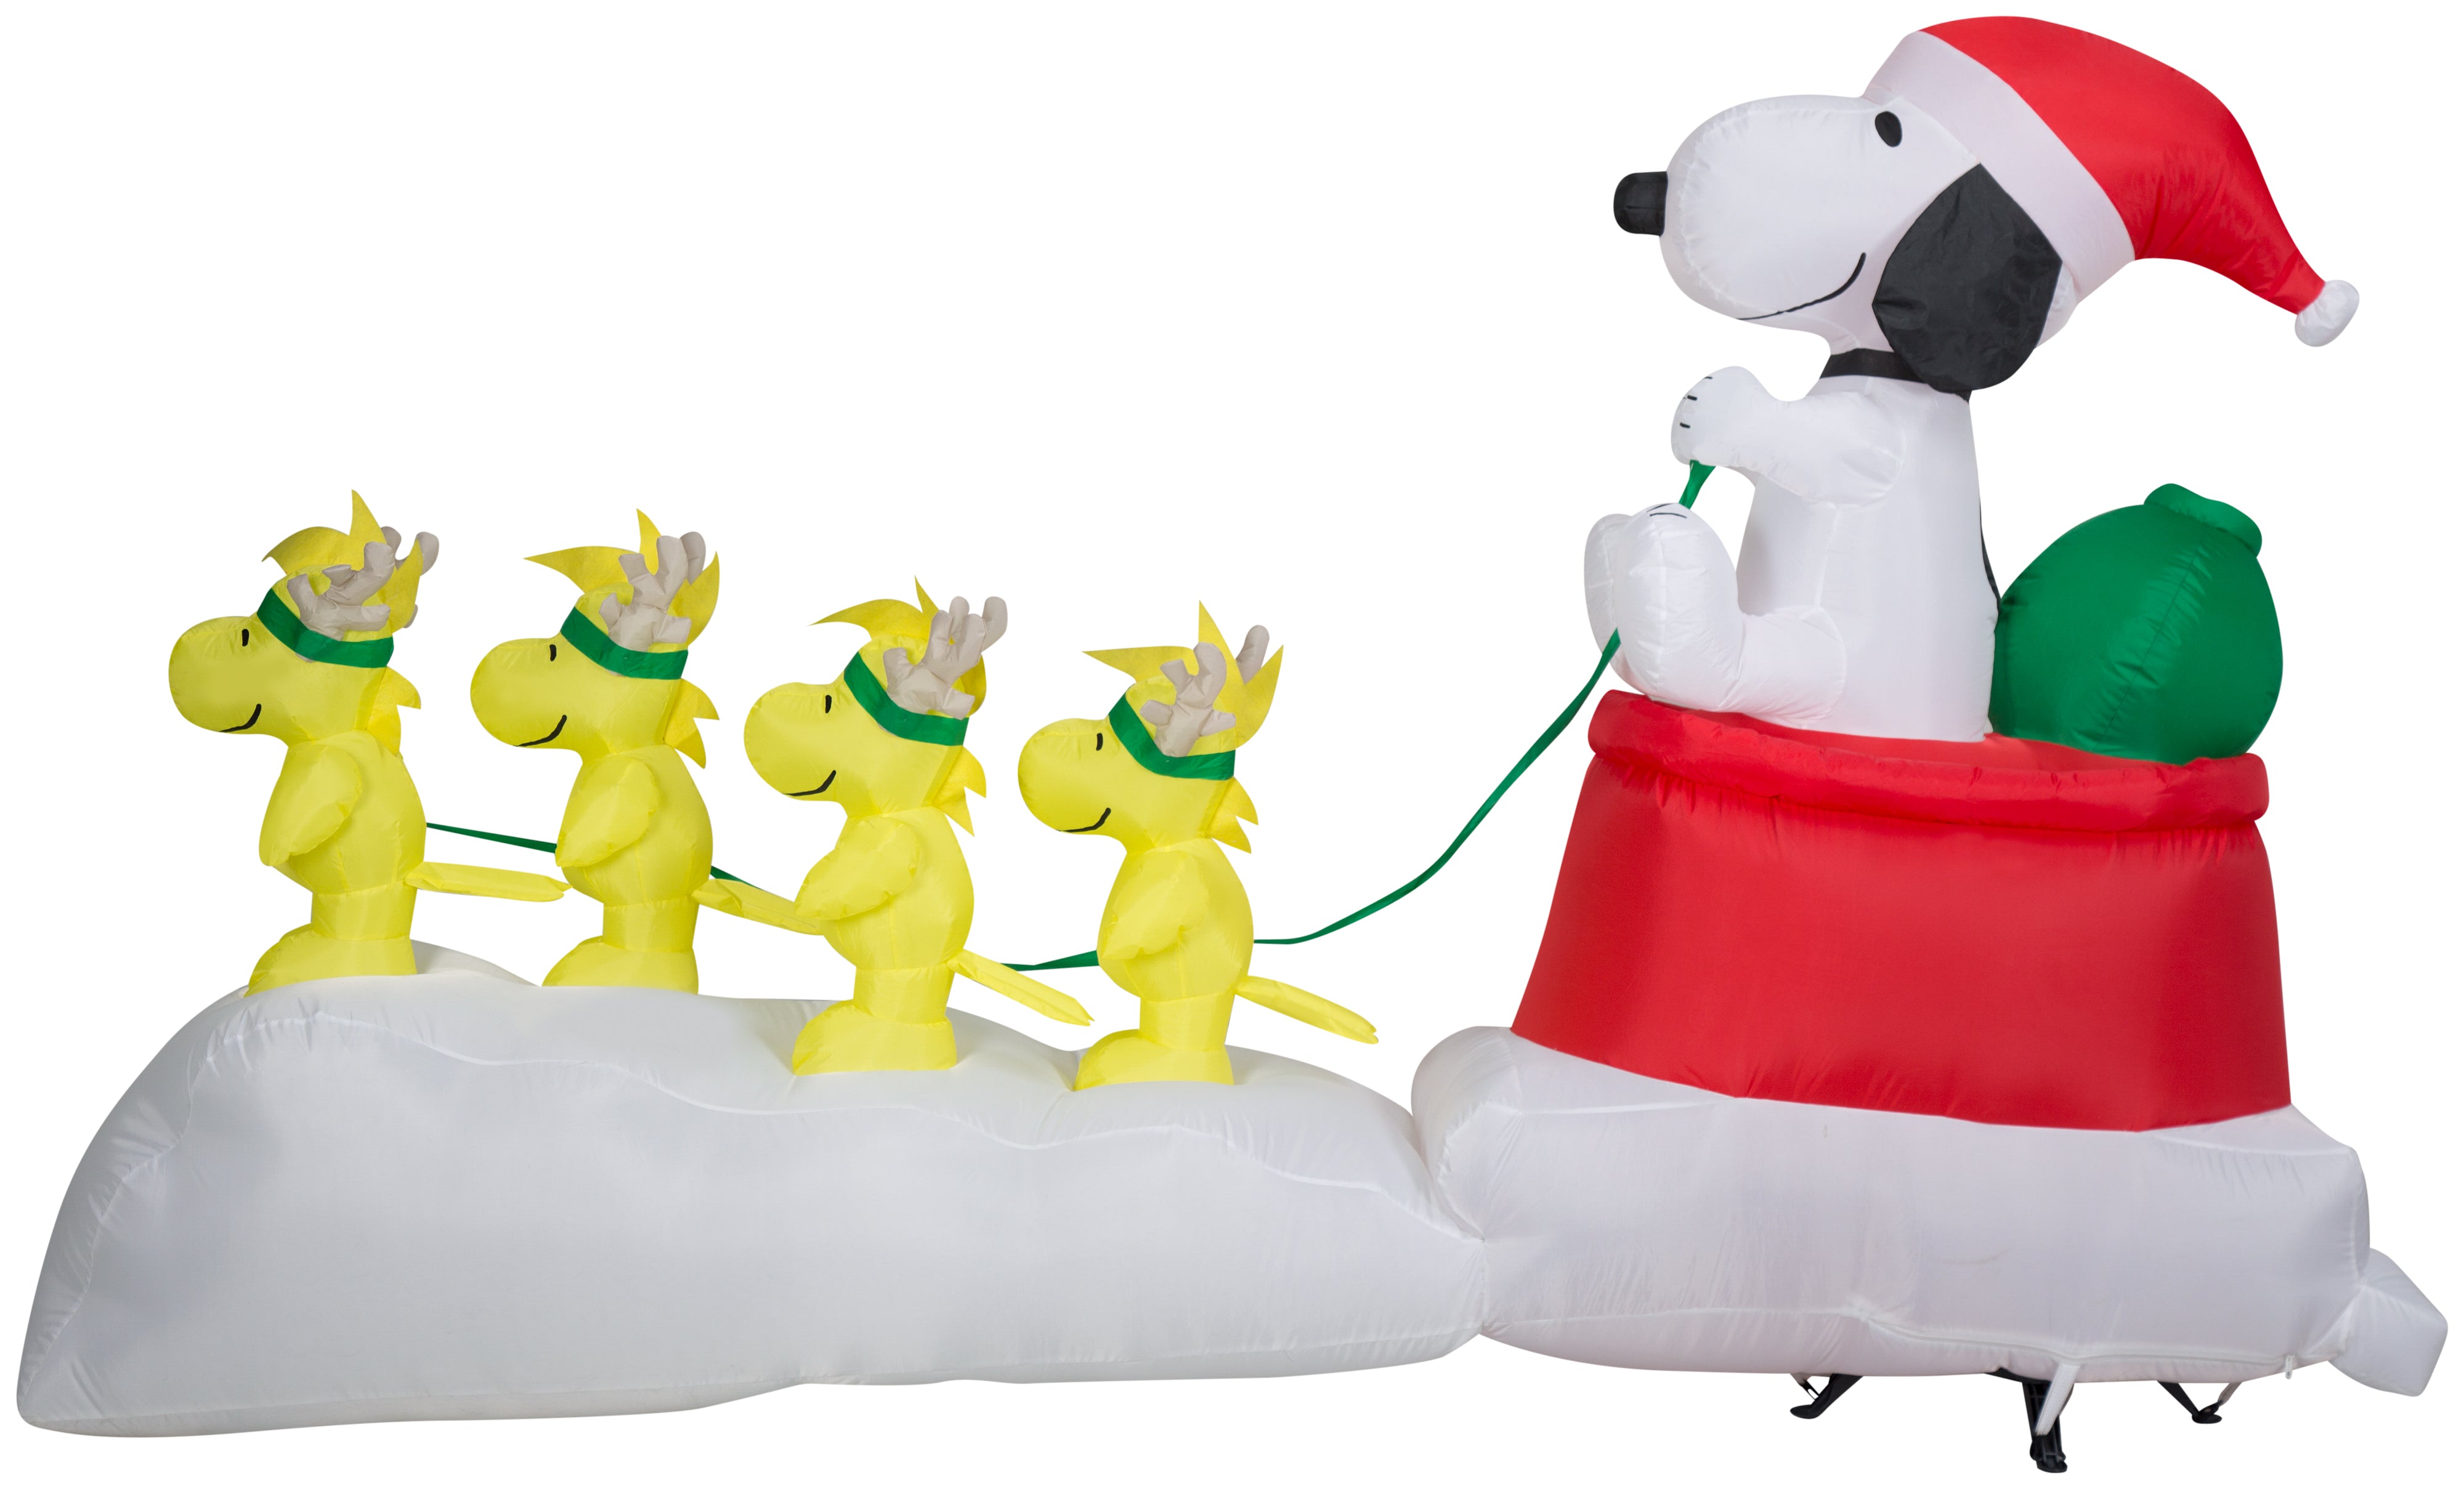 Gemmy Christmas Airblown Inflatable Snoopy in Dog Bowl Sleigh w/Woodstocks Scene Peanuts, 5 ft Tall